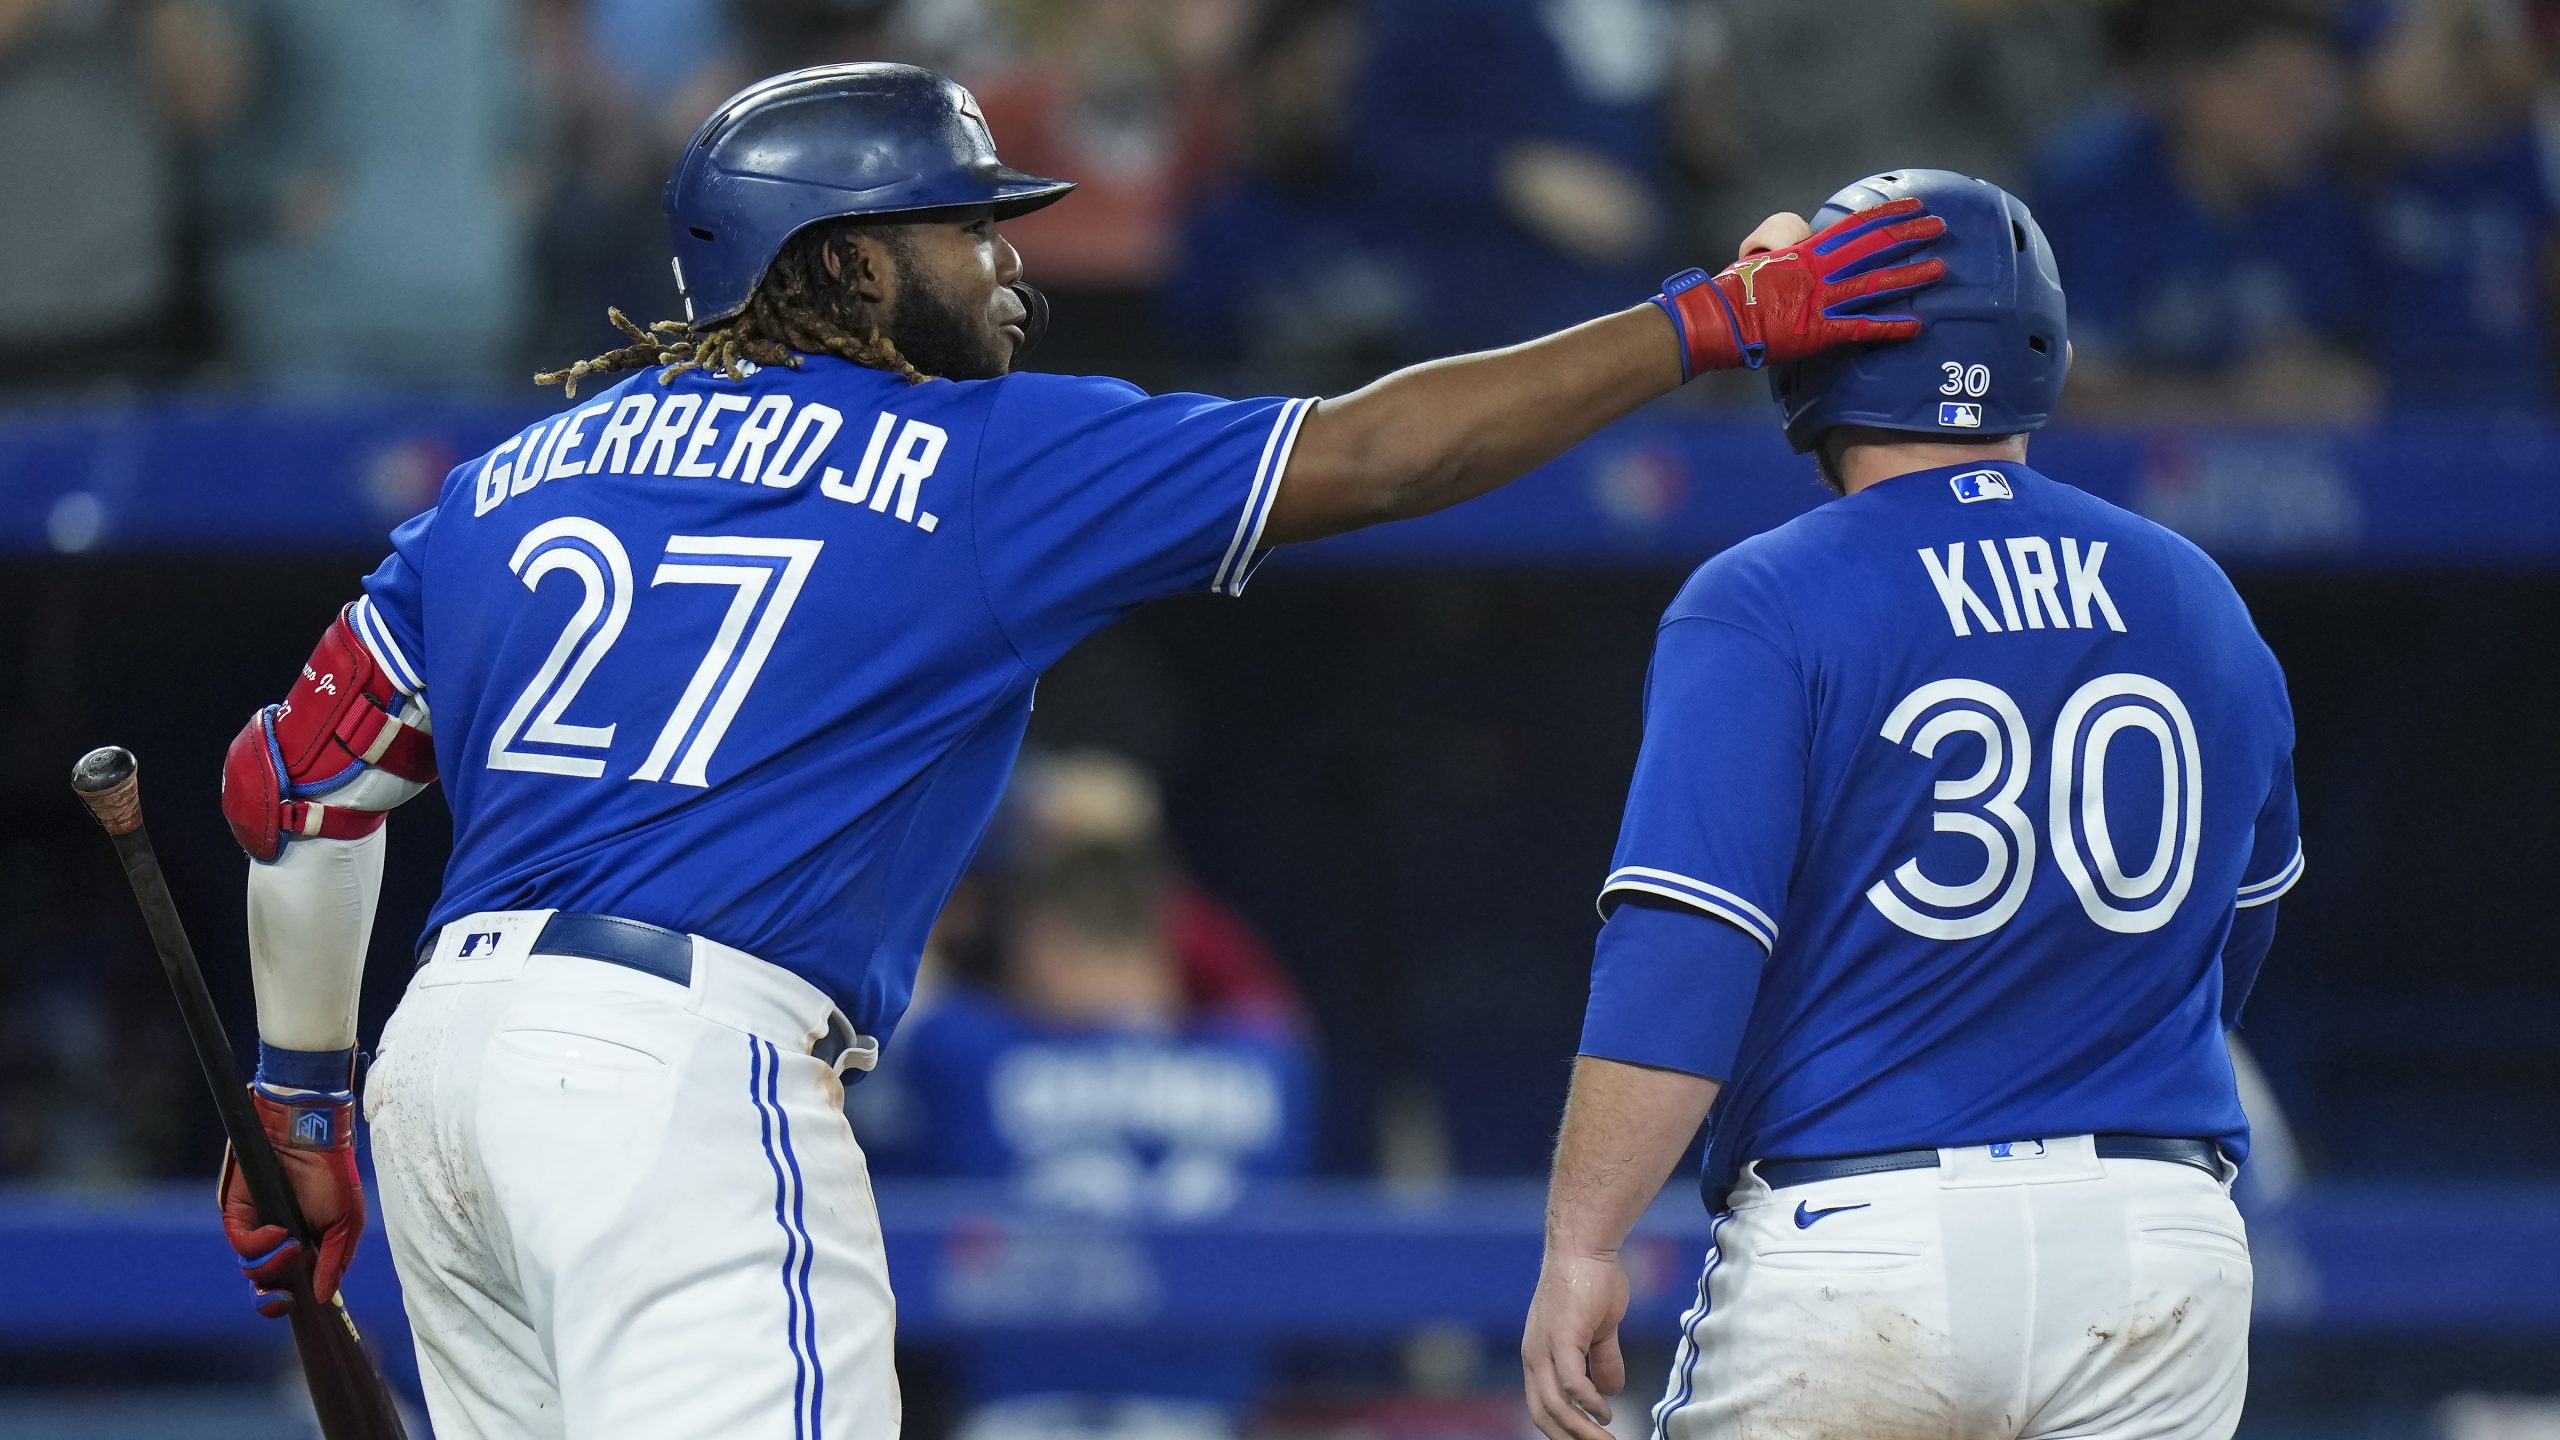 World Baseball Classic: Kirk, Guerrero Jr. out as rosters take